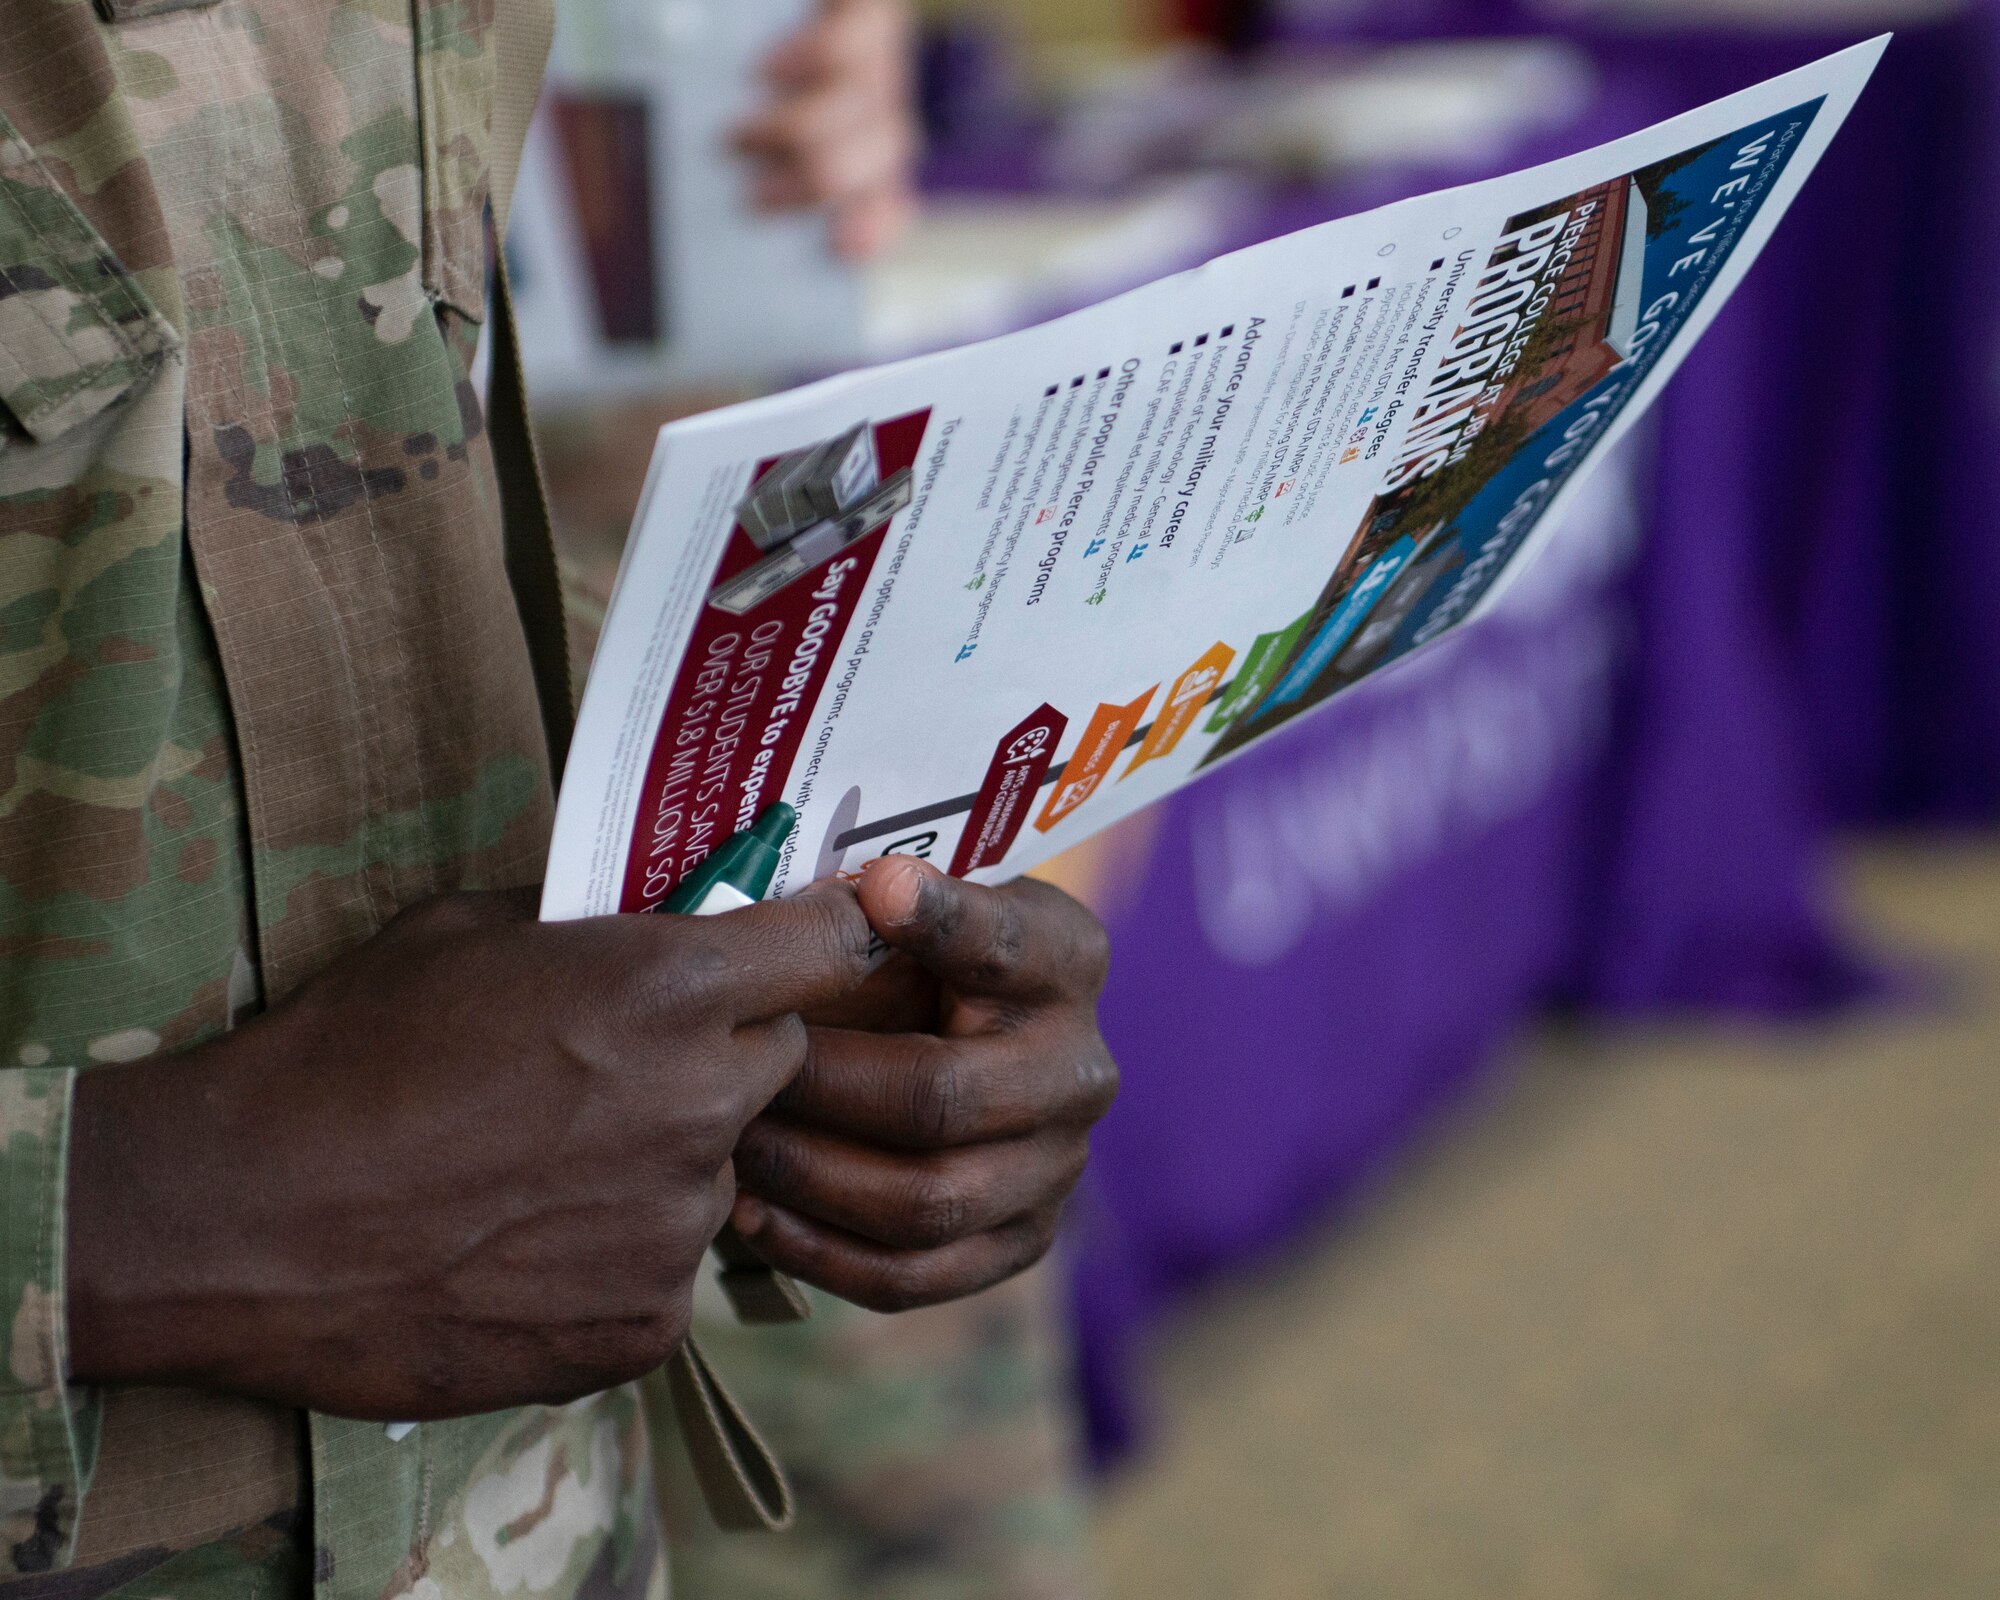 U.S. Army Pvt. Romario Osborne, a soldier assigned to the 6th Brigade Engineer Battalion, 4th Infantry Brigade Combat Team (Airborne), 25th Infantry Division, U.S. Army Alaska, gathers information about tuition programs during the Fall Education Fair at Joint Base Elmendorf-Richardson, Alaska, Oct. 31, 2019. The JBER Army Education Center held the event, which allowed more then 20 vendors to showcase different educational opportunities.